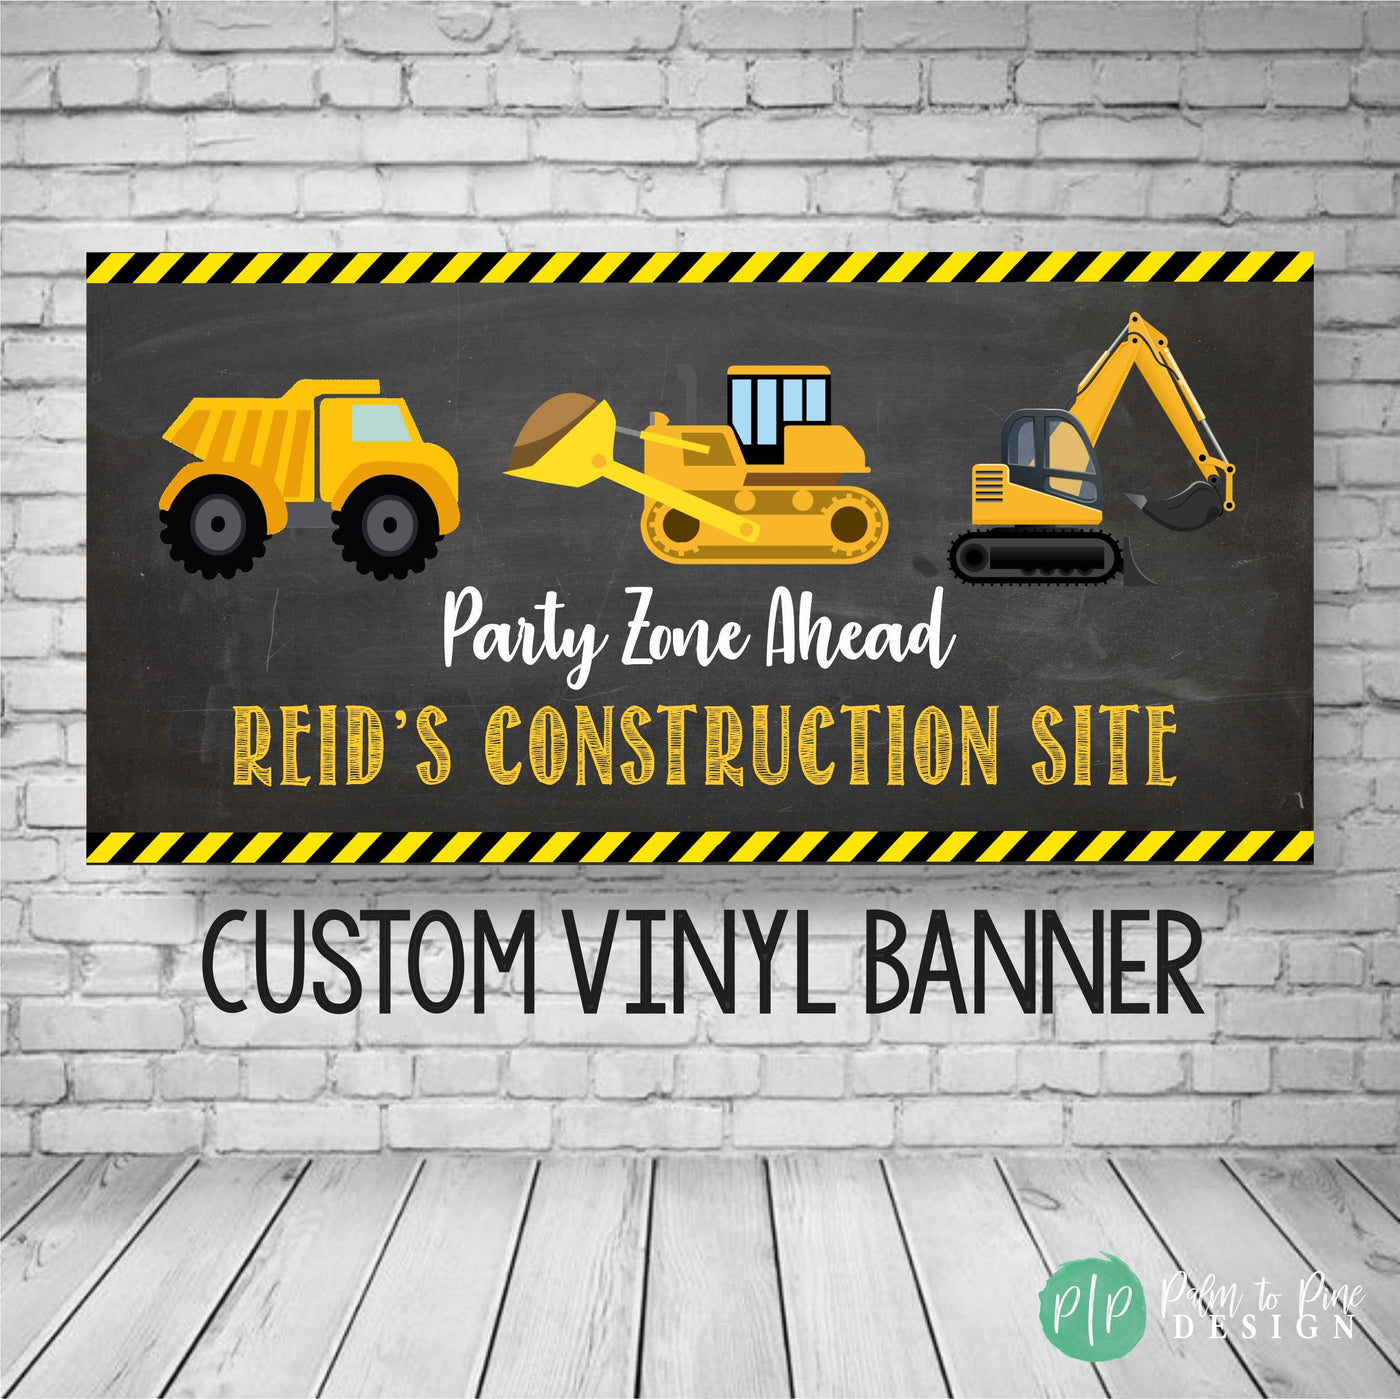 Construction Birthday Banner, Construction Party Decor, Construction Birthday Party, Construction Party Decorations, Personalized Banner